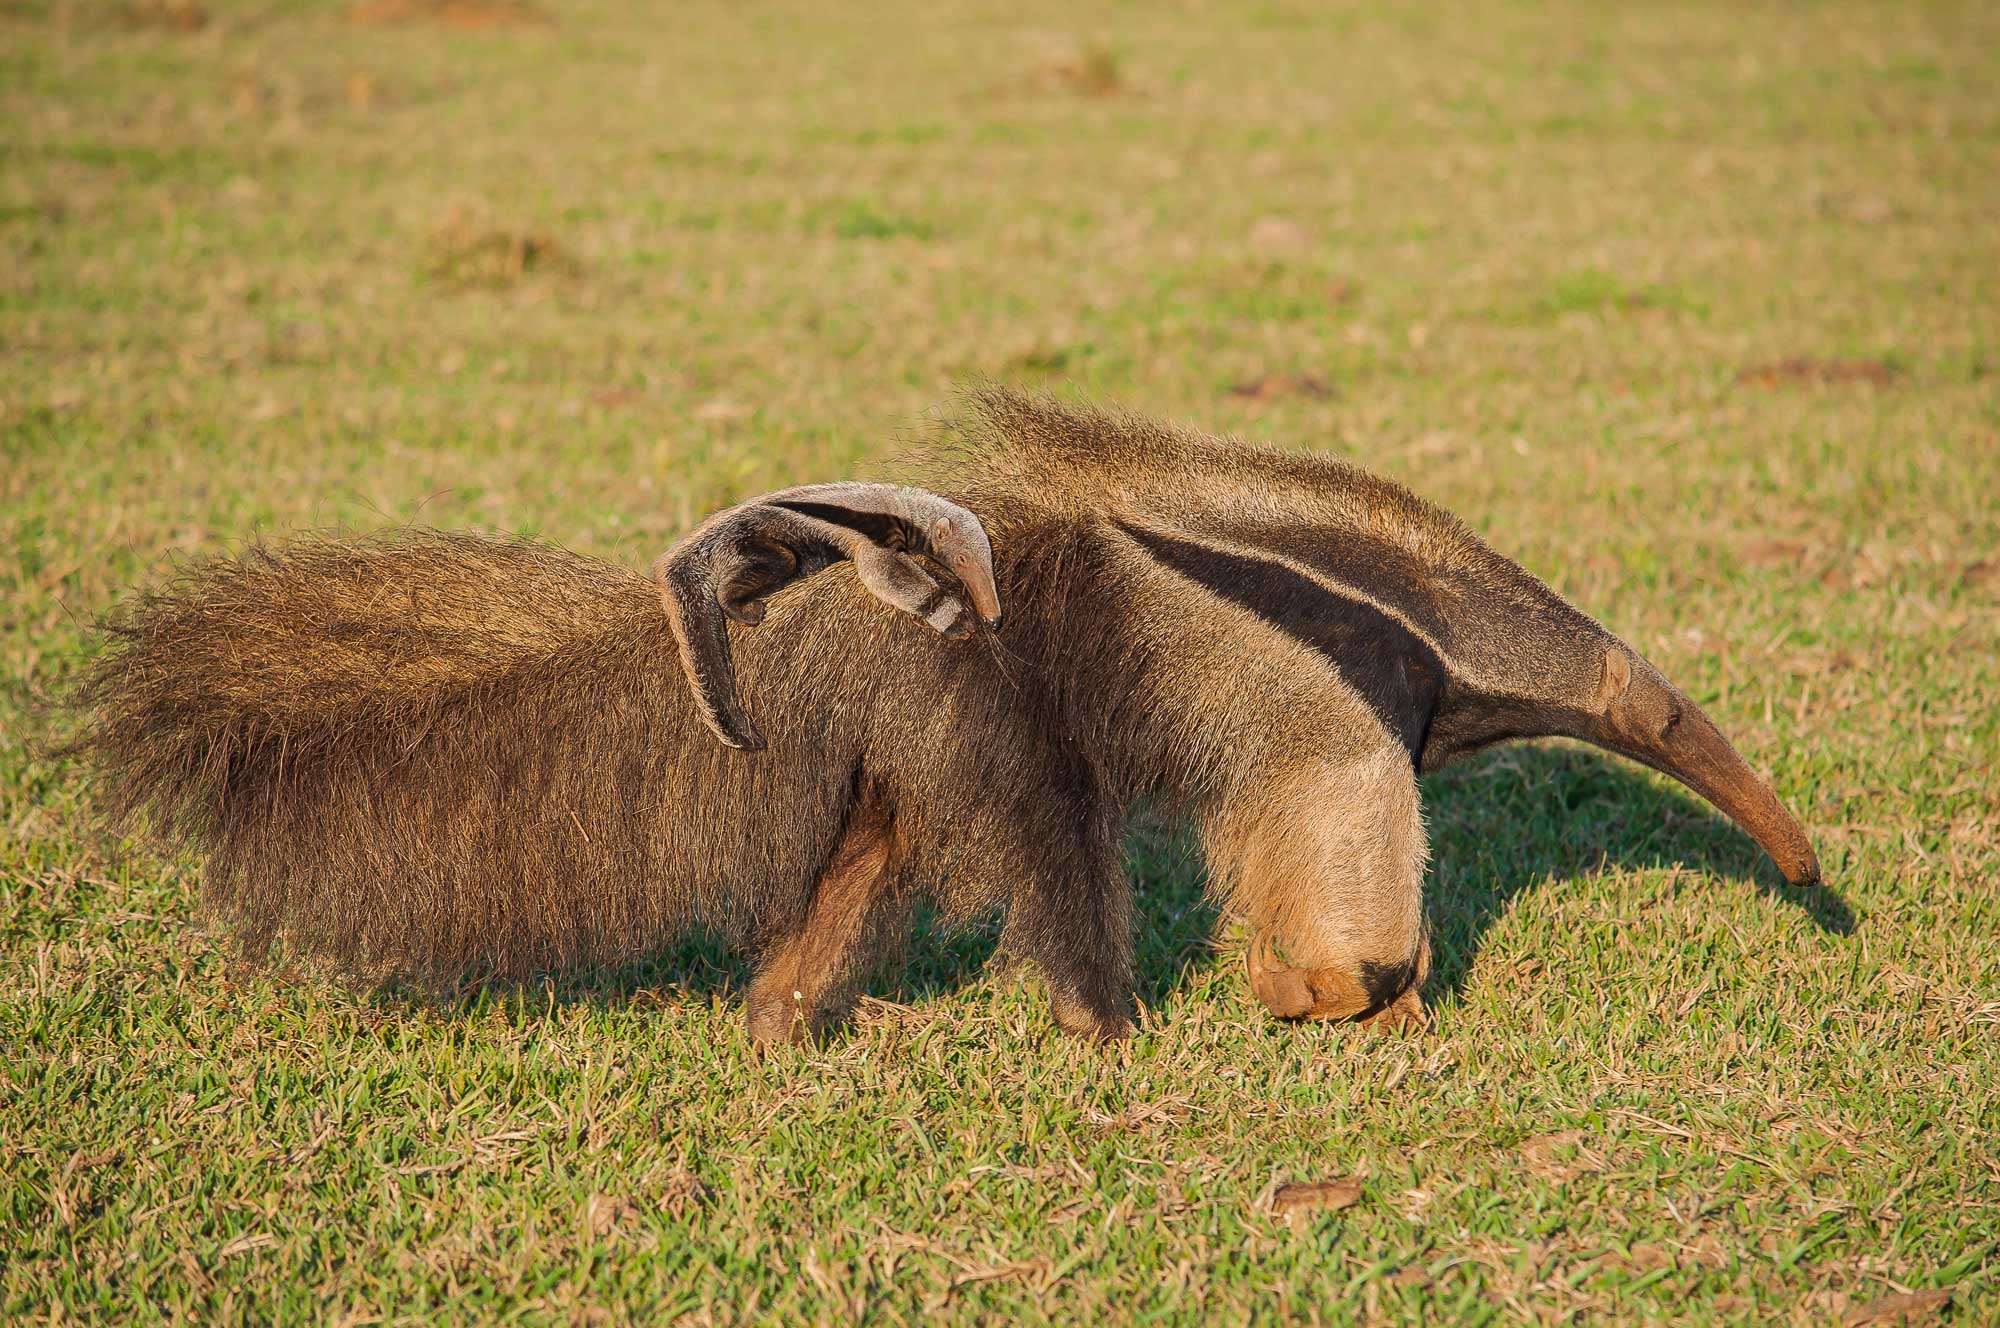 A photograph of giant anteater with its baby riding on its back. The photo shows an anteater walking over ground covered with short grass. The anteater is brown with a long snout and very bushy tail. Its baby is clinging to its back near its tail.